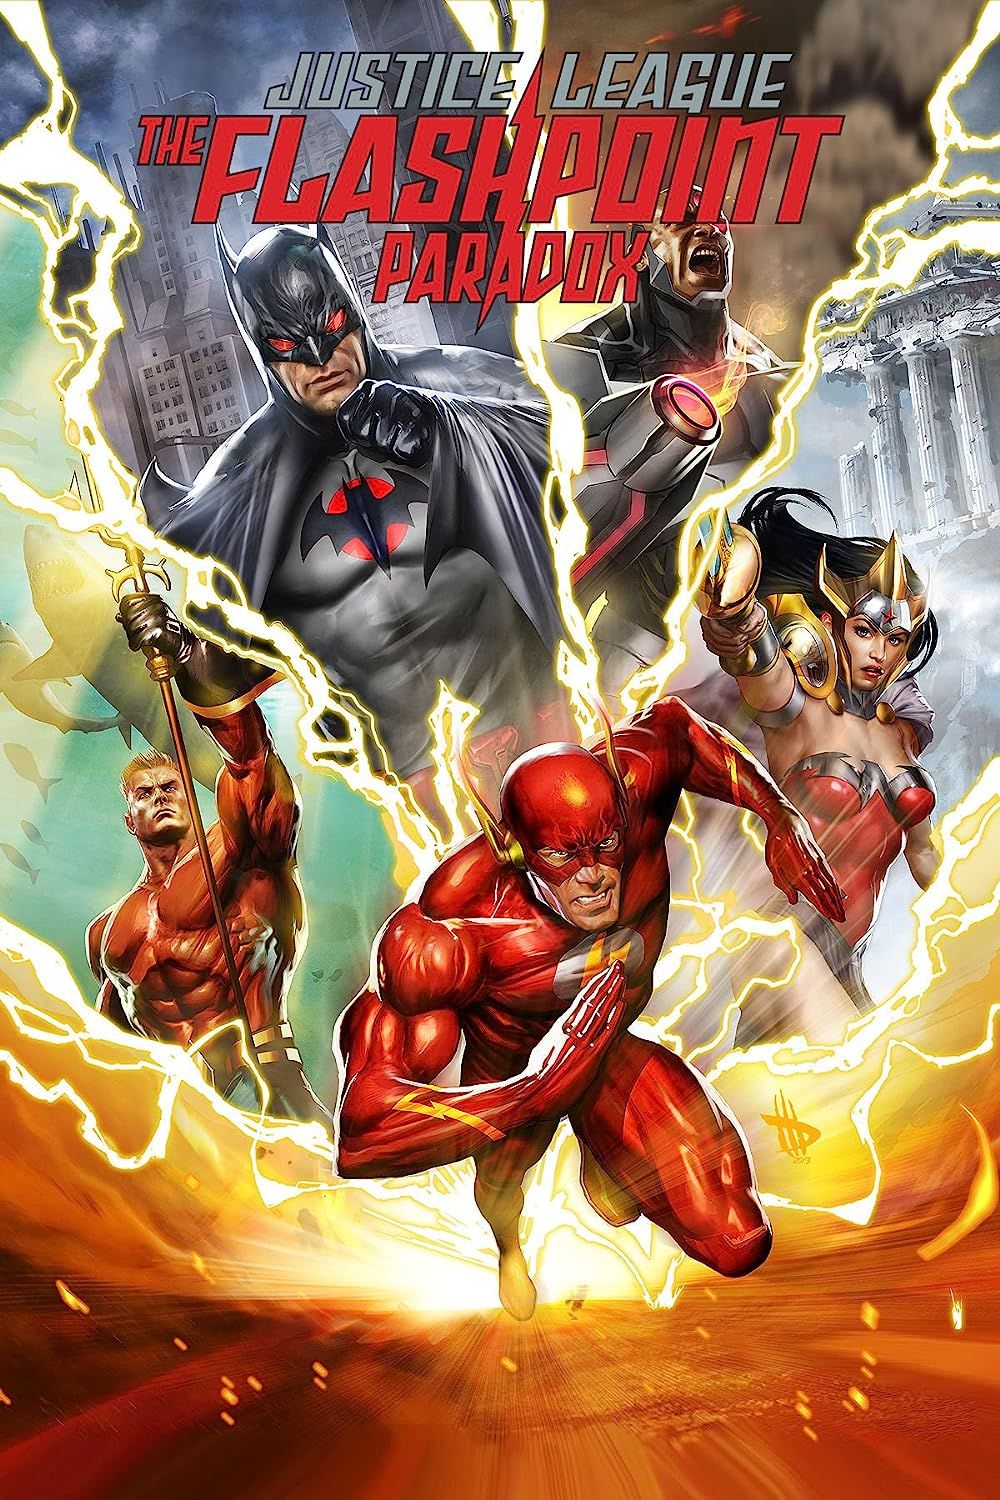 The Flash and Alternate Versions of Heroes on the Justice League The Flashpoint Paradox Poster